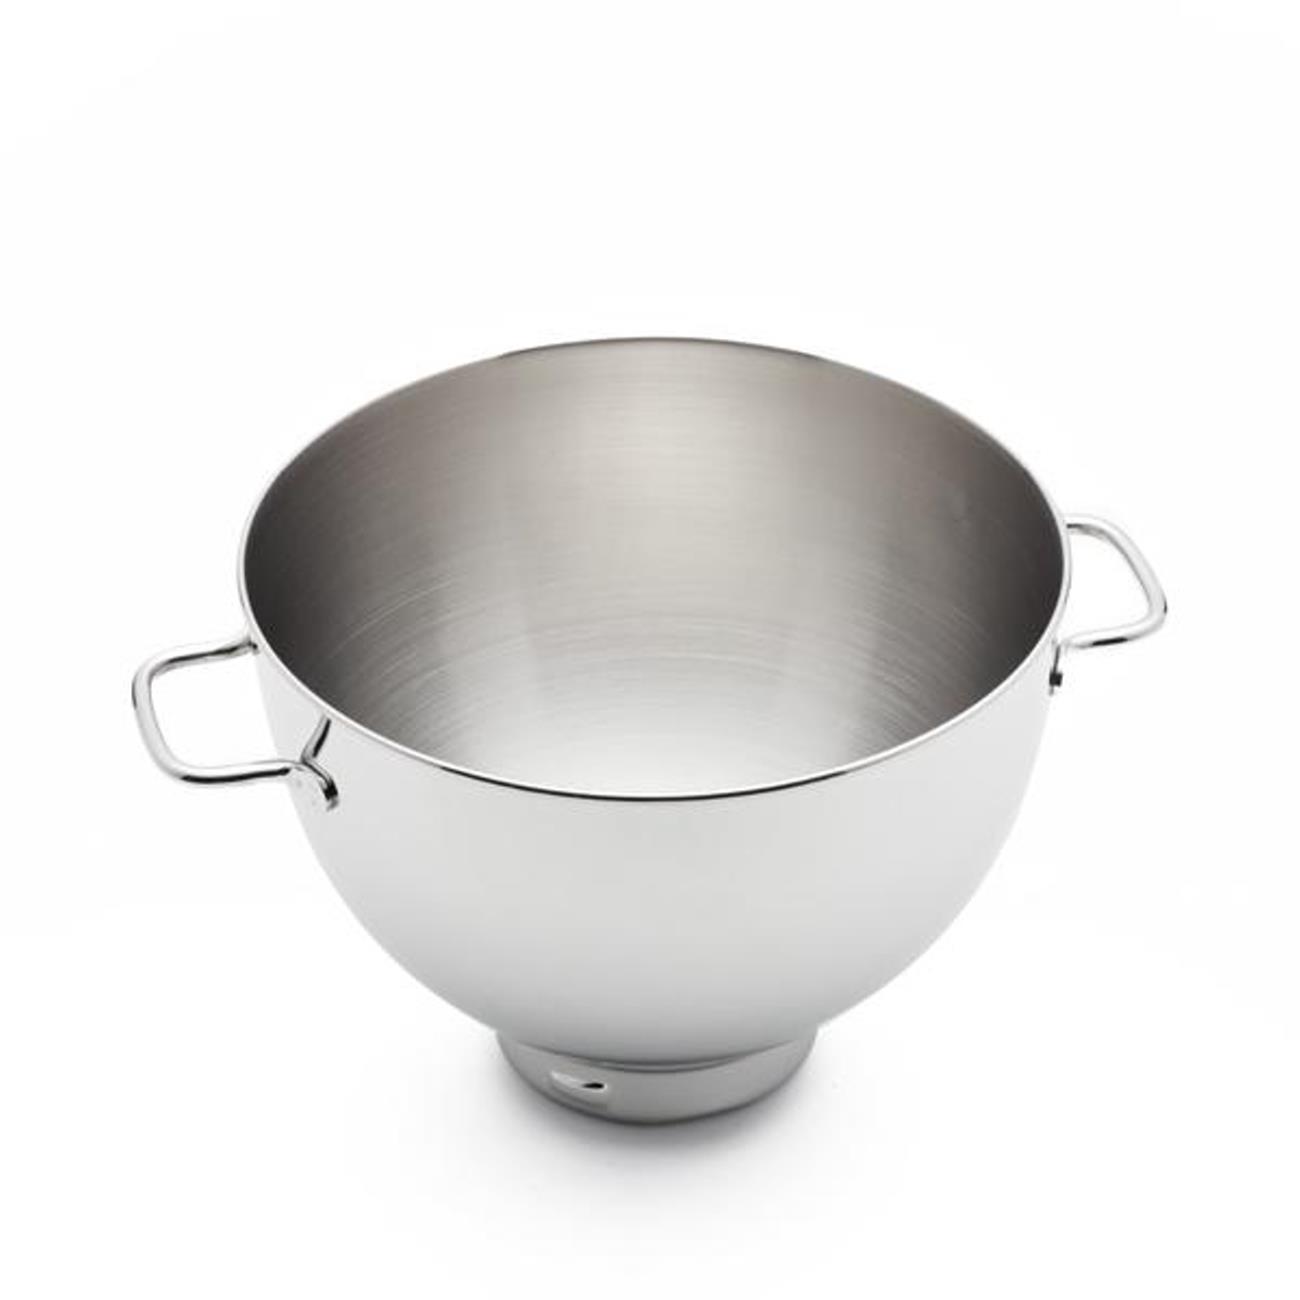 Bowl (Stainless Steel)